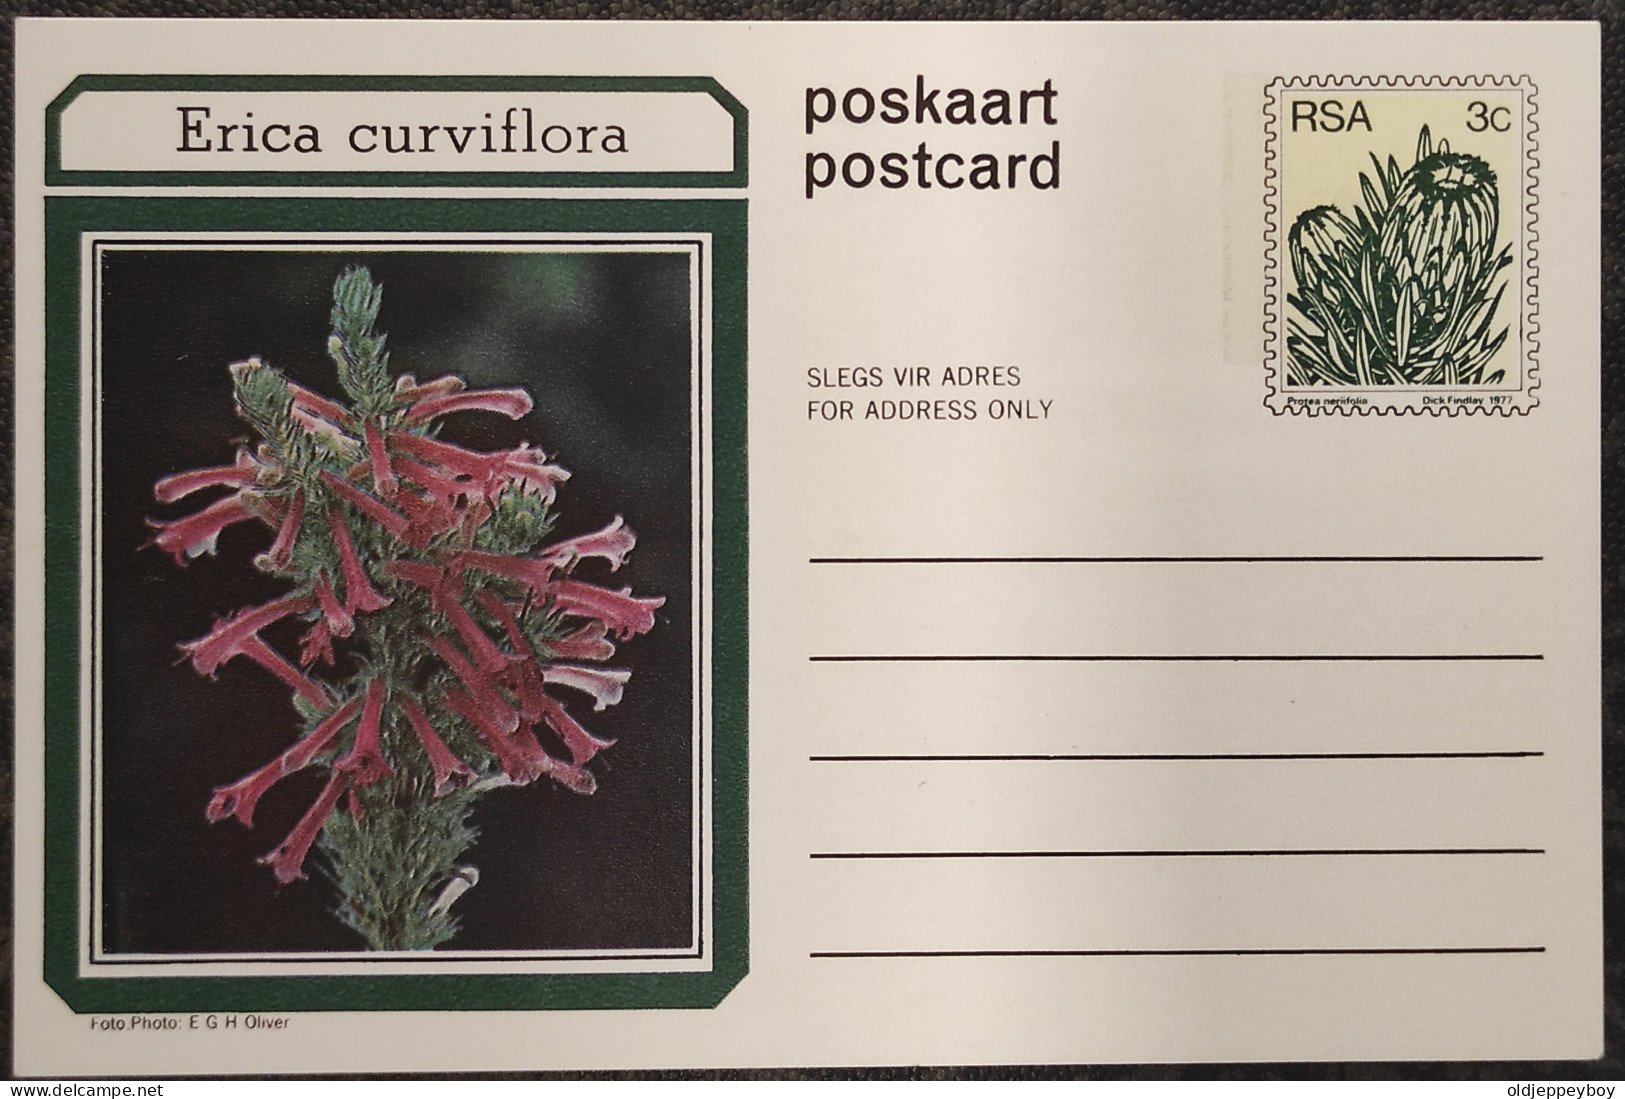 3c SOUTH AFRICA Postal STATIONERY CARD Illus ERICA CURVIFLORA FLOWER Cover Stamps Flowers Rsa - Briefe U. Dokumente